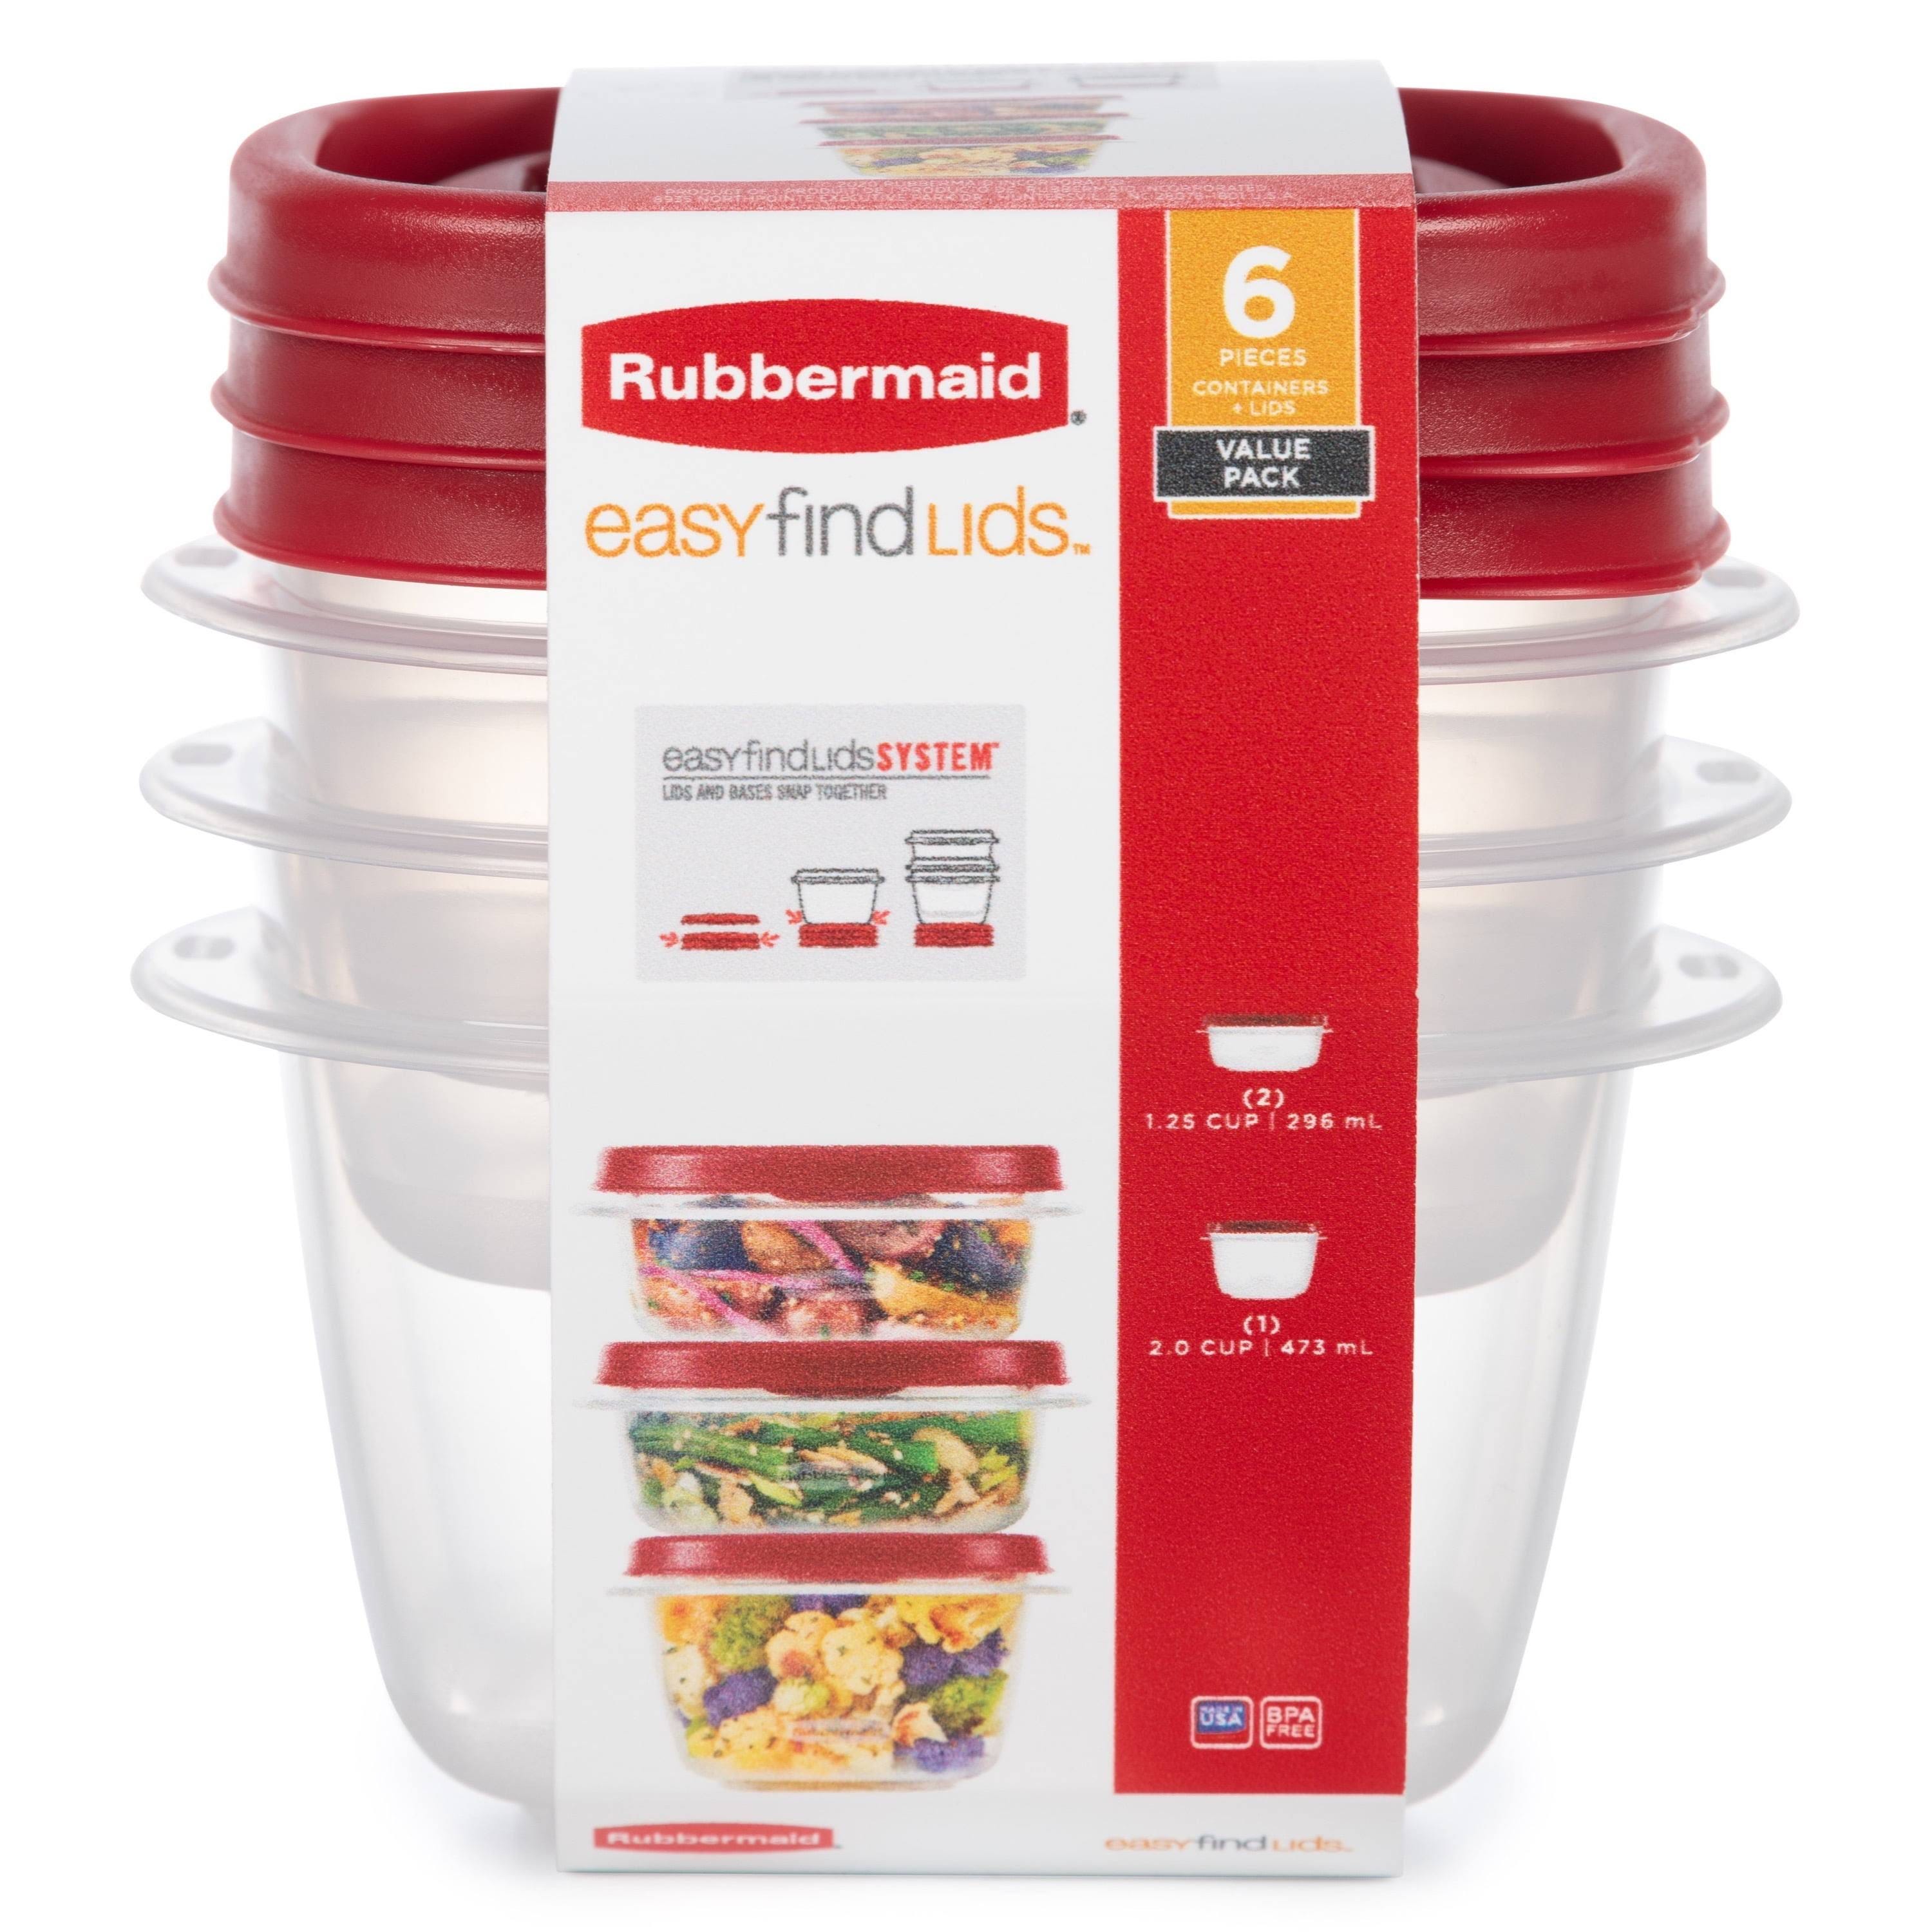 Rubbermaid Easy Find Lids Valuable Pack, 3 Storage Containers | Image